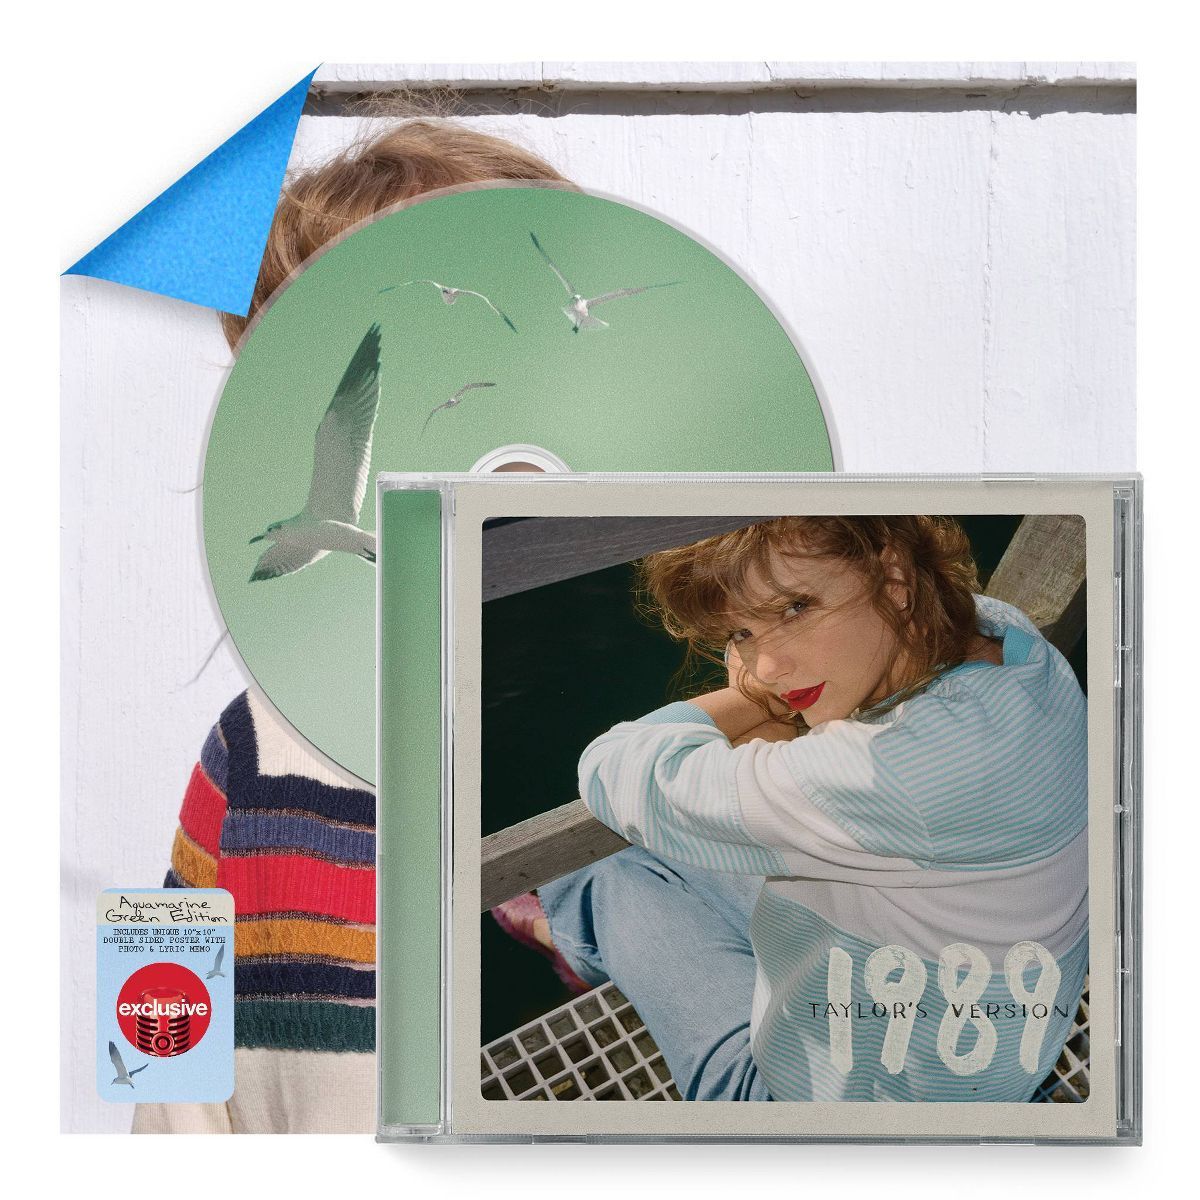 Taylor Swift - 1989 (Taylor's Version) Aquamarine Green Deluxe Poster Edition (Target Exclusive, ... | Target